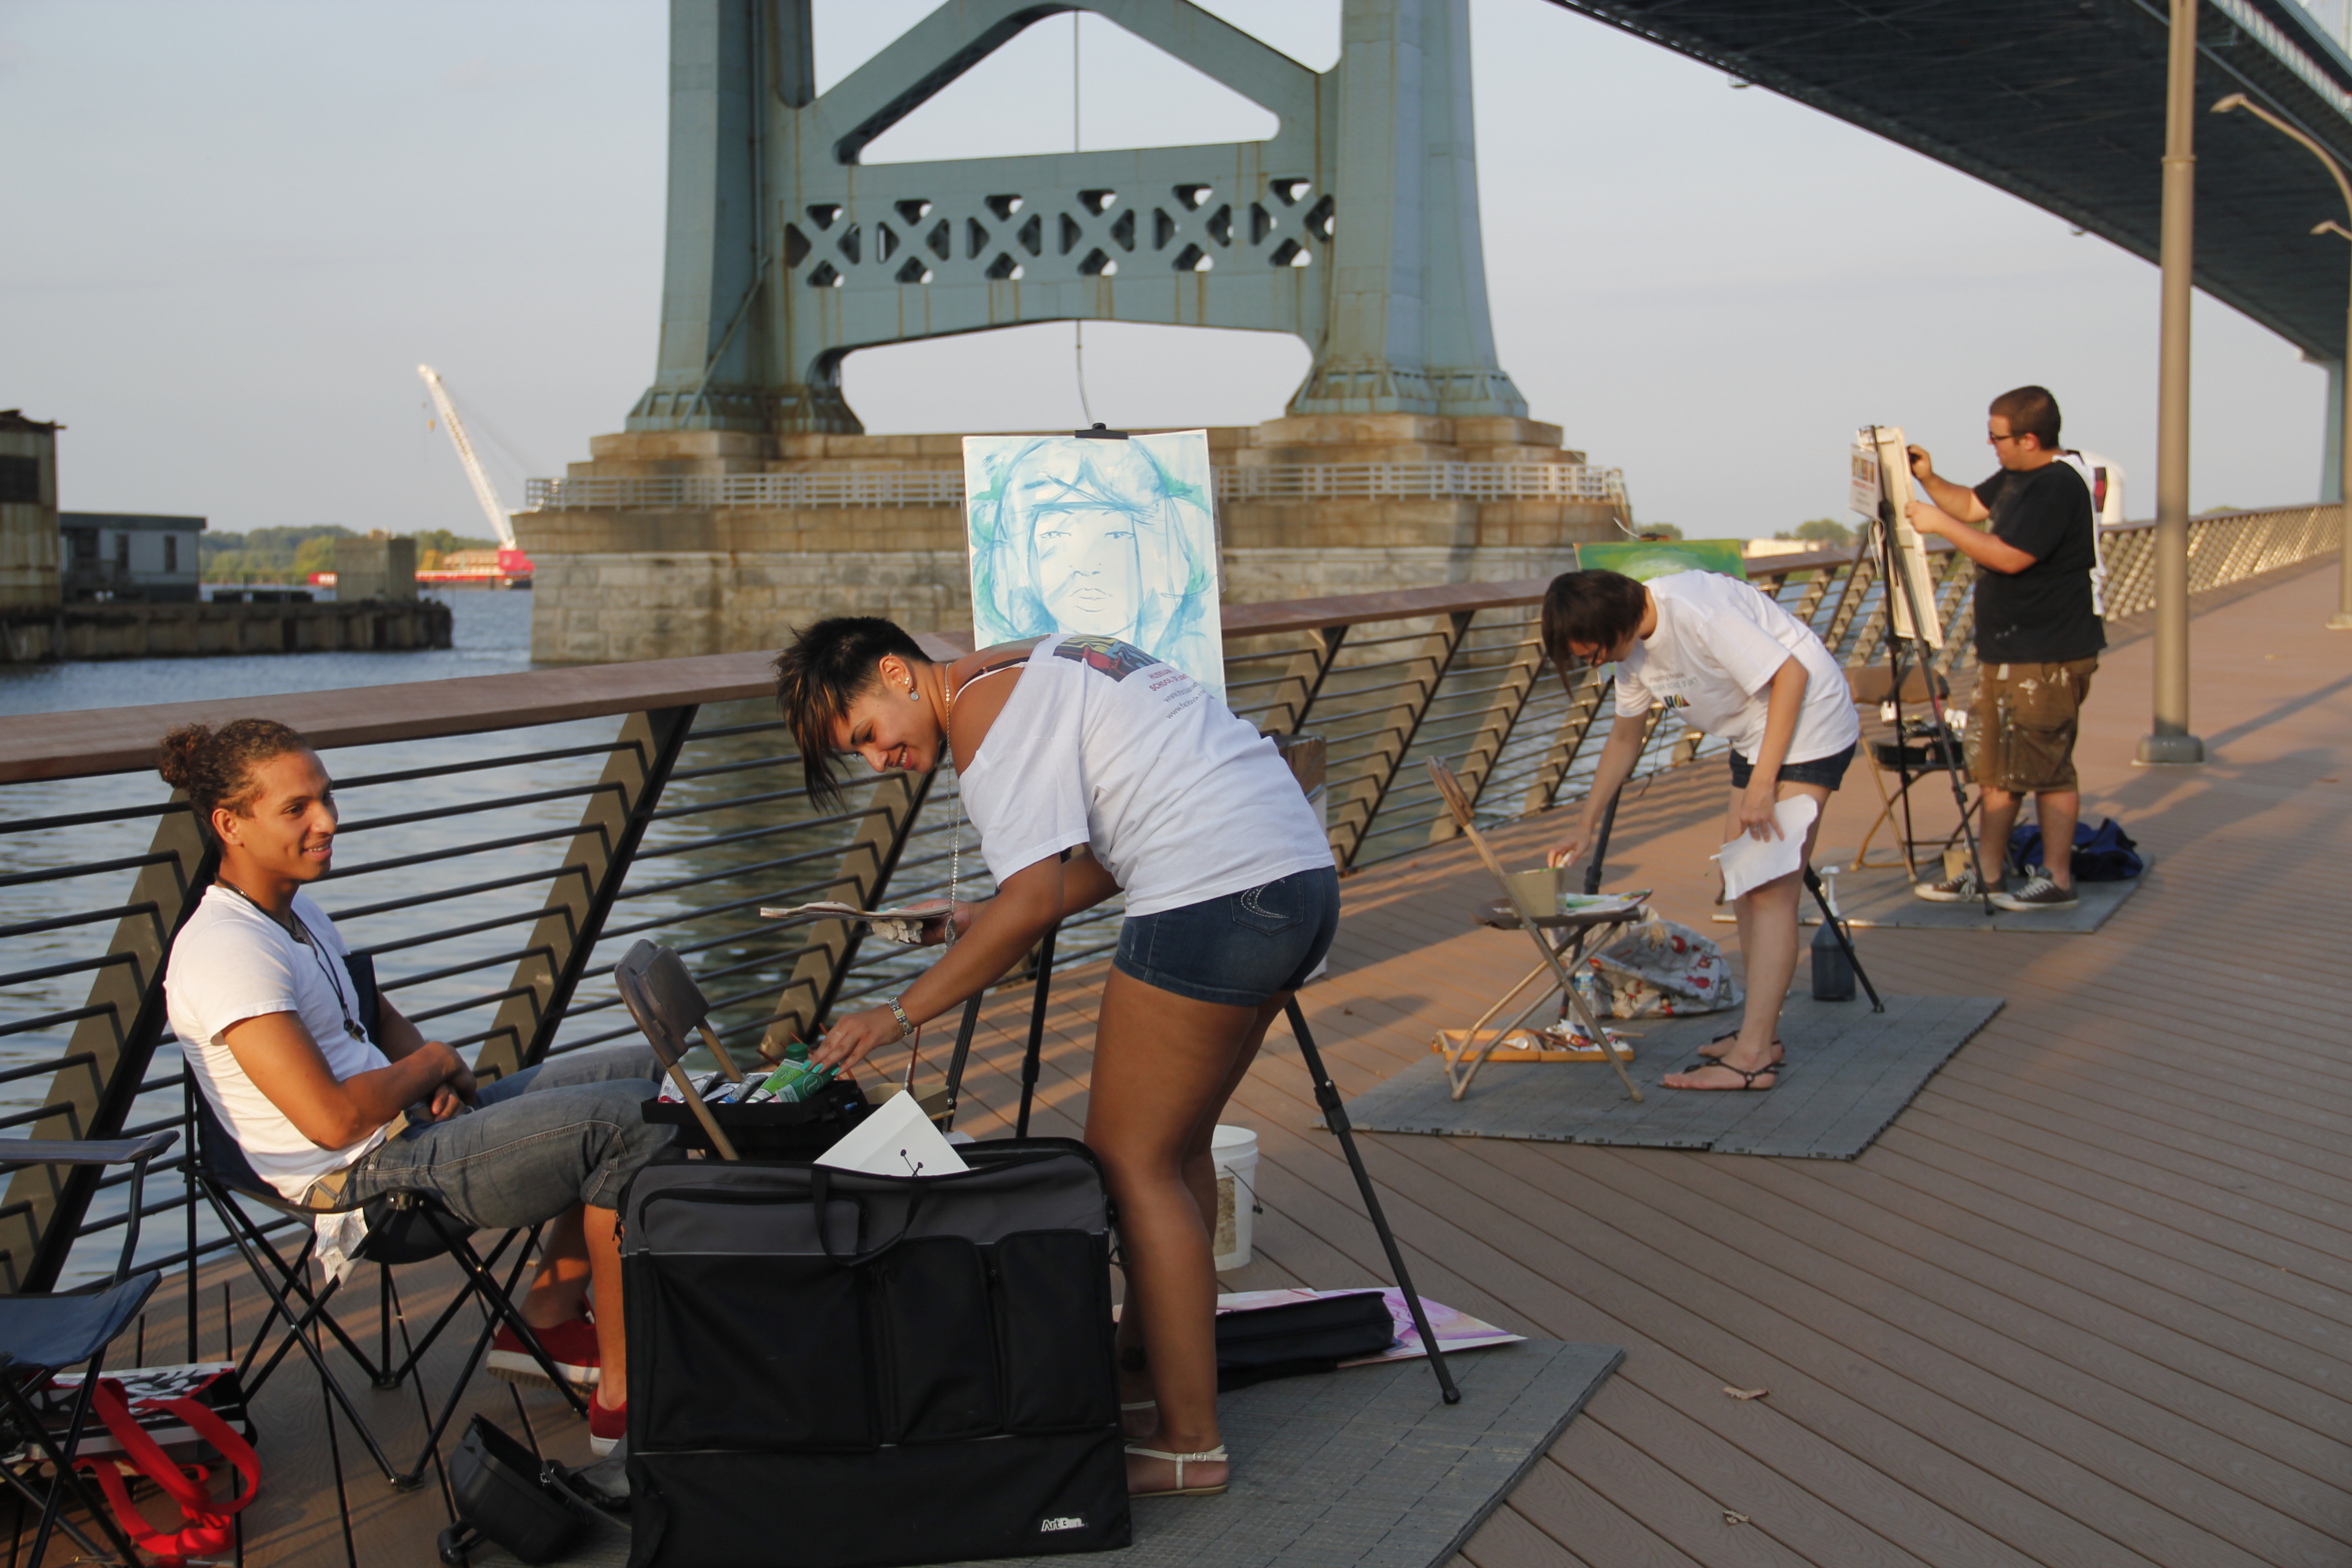 Catching up with food and tunes at First Friday on Race Street Pier